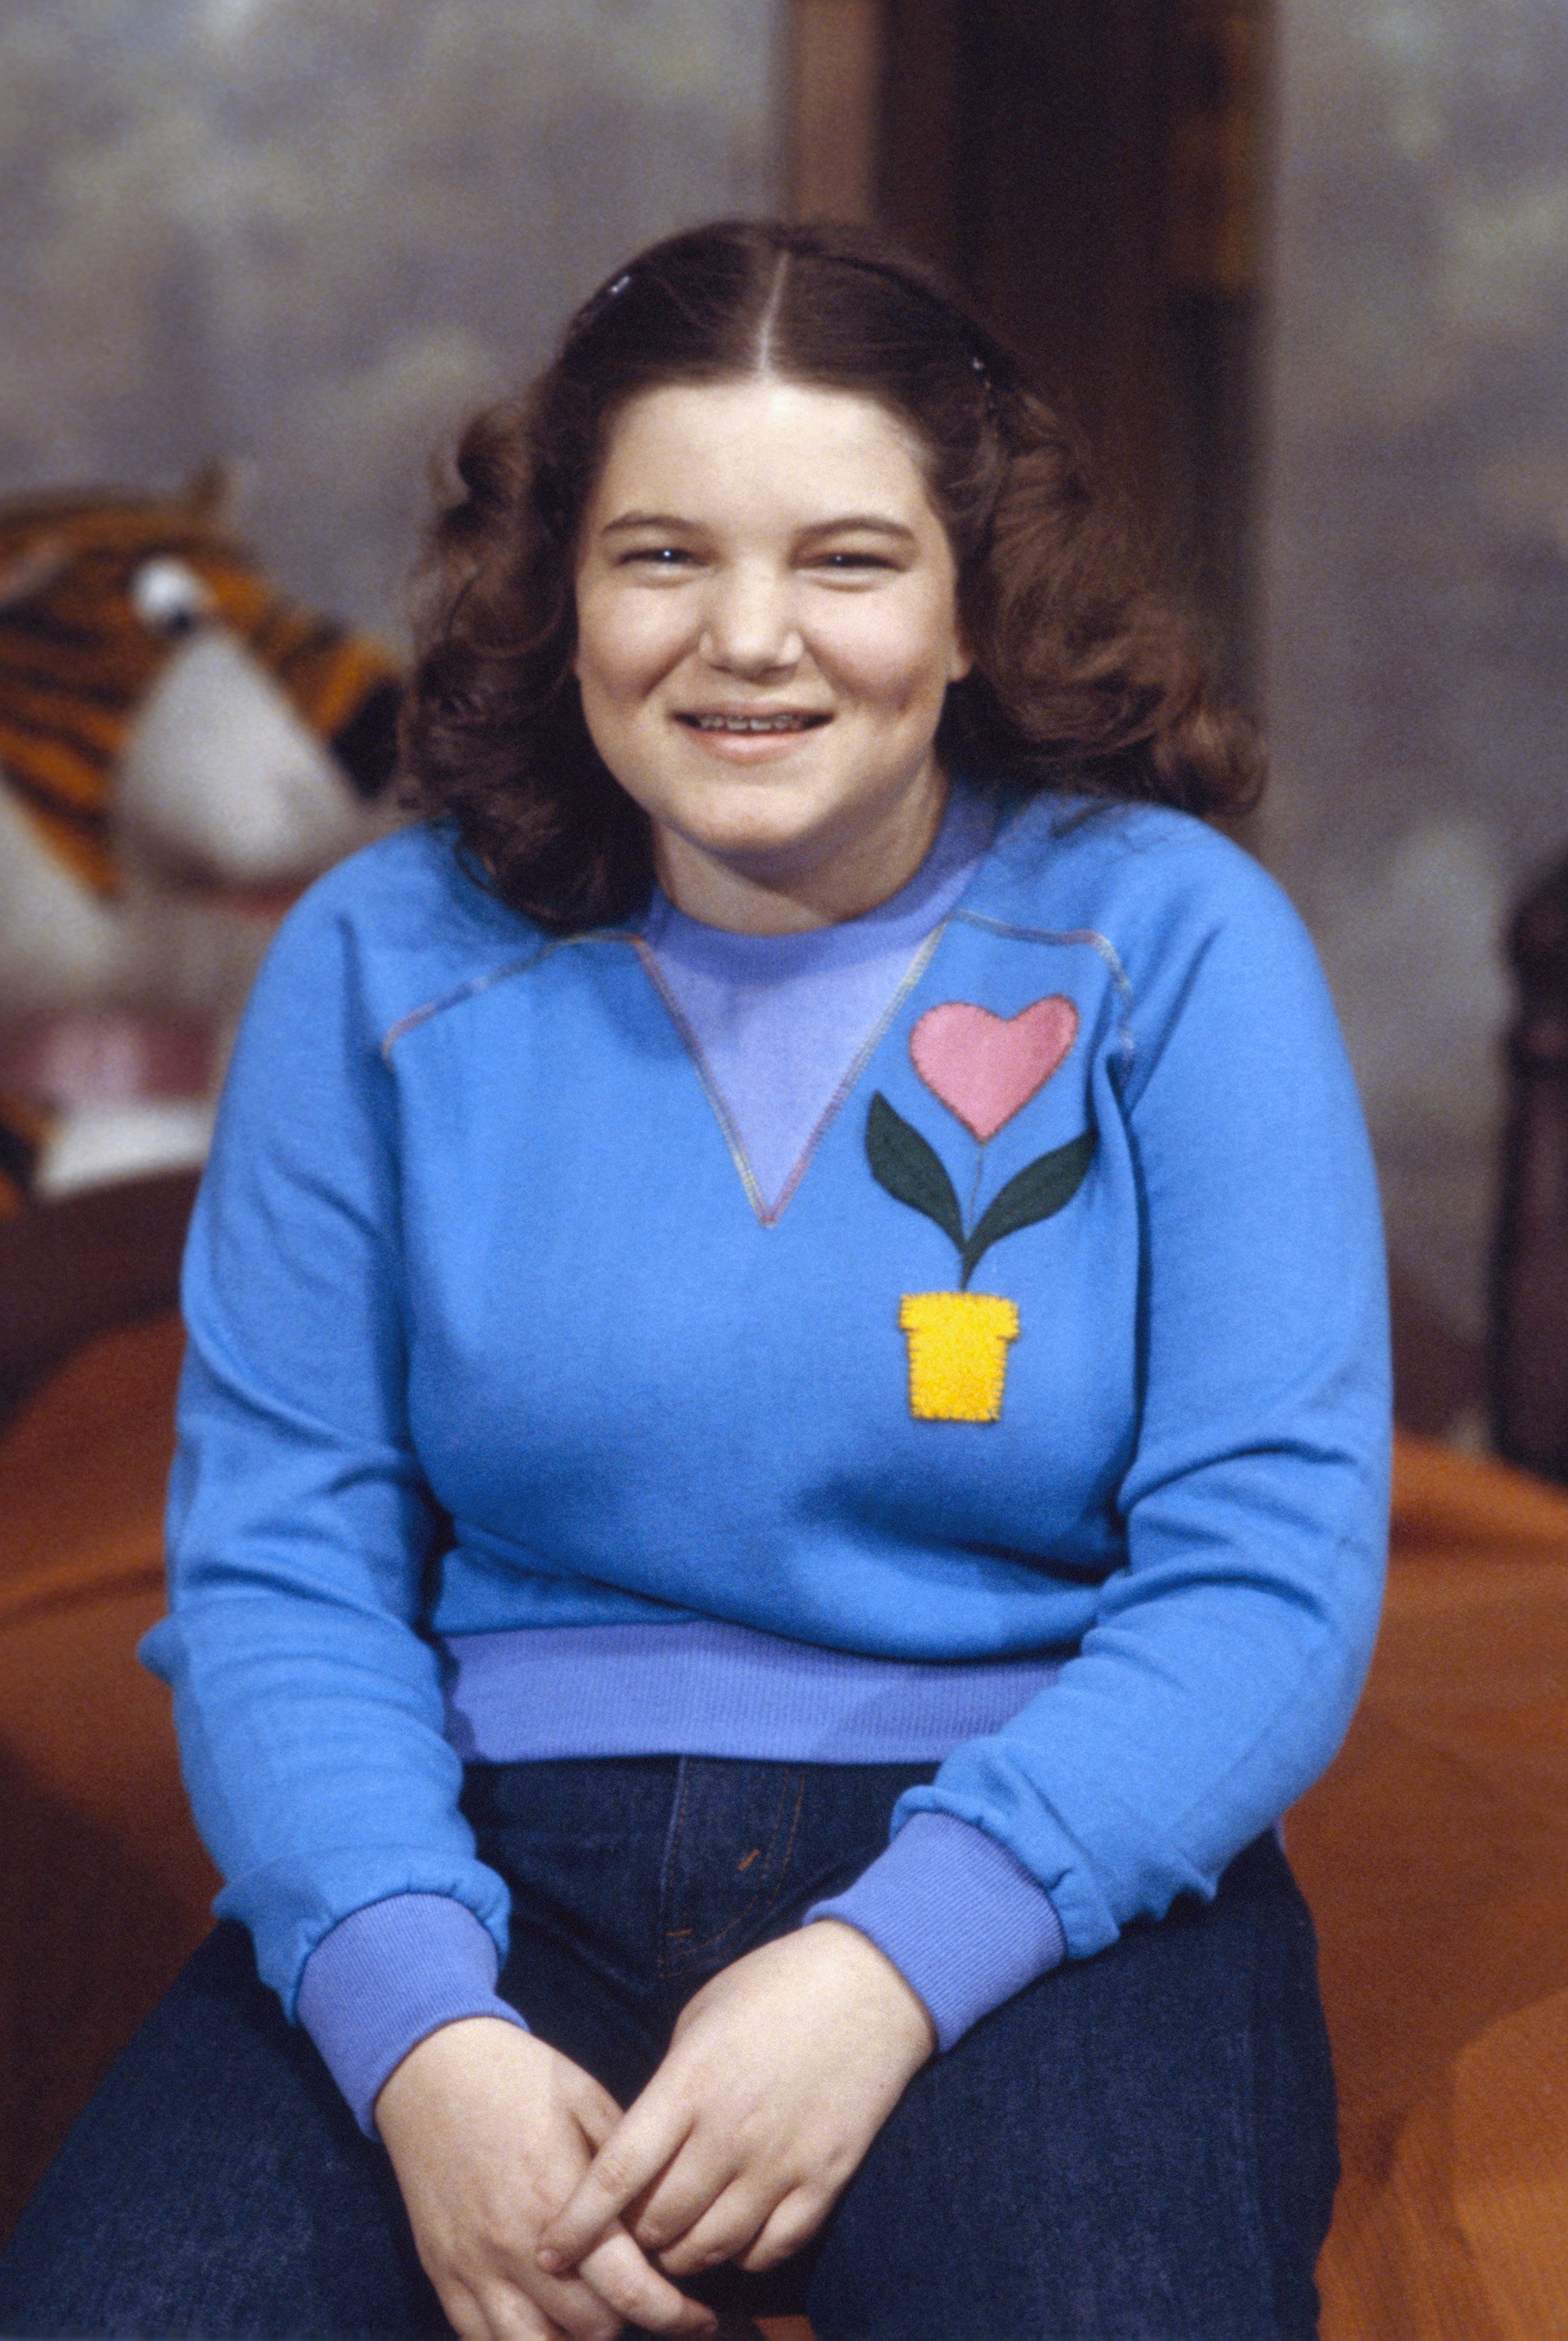 Actress Mindy Cohn as Natalie Green in the American sitcom, "The Facts of Life," on January 1, 2000 ┃Source: Getty Images